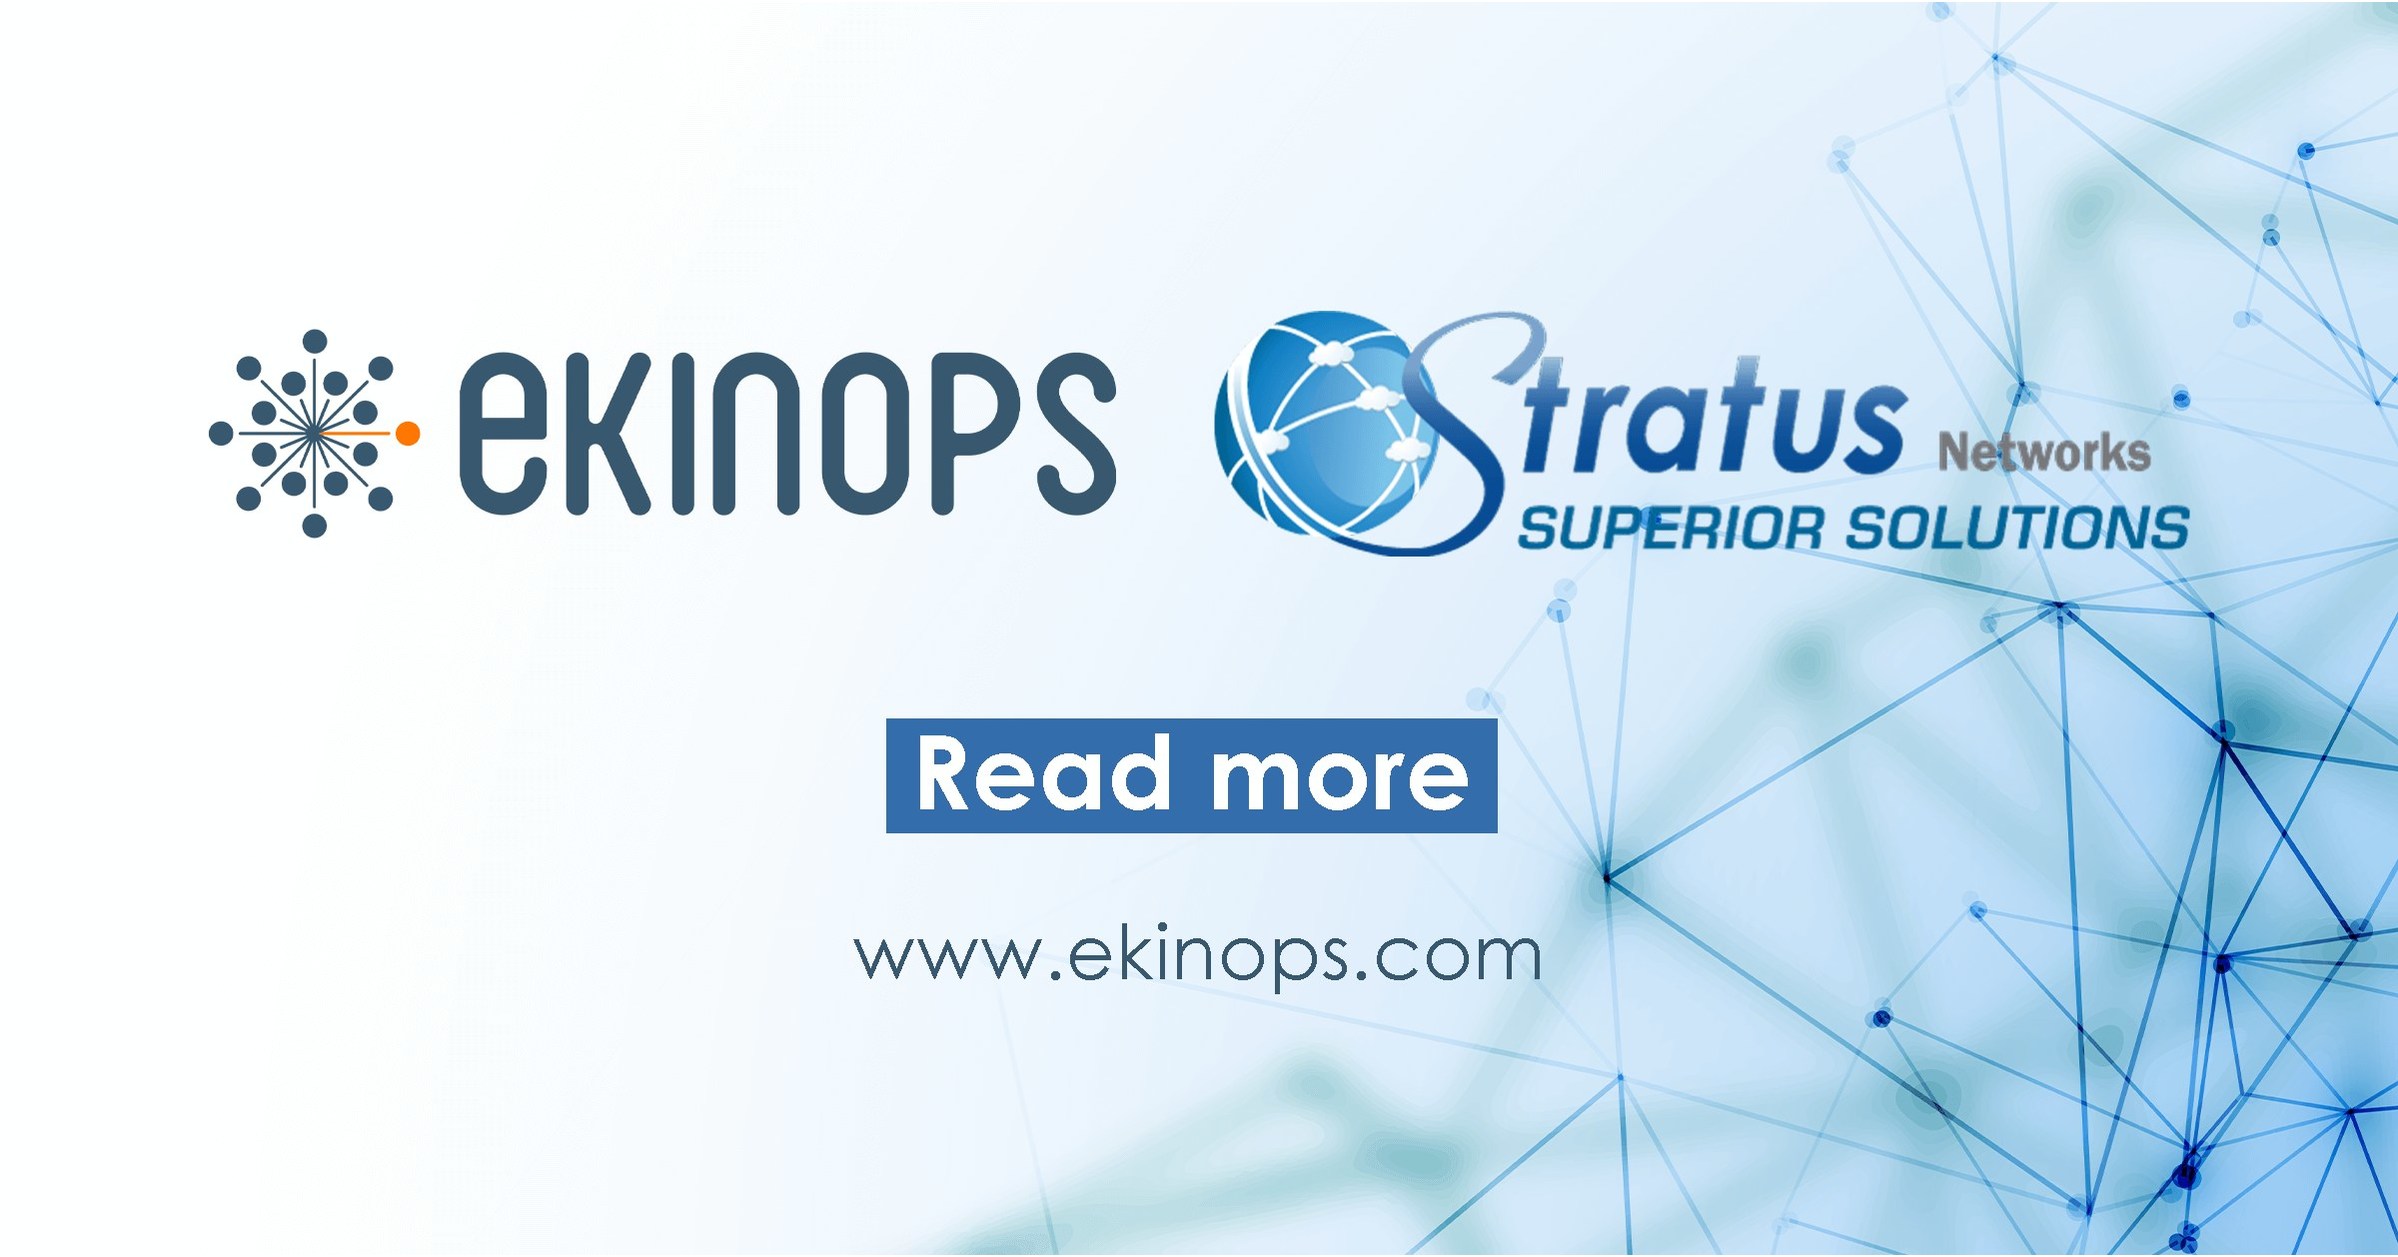  Ekinops Delivers Mobile Backhaul Connectivity with Wire-speed Testing to Stratus Networks 